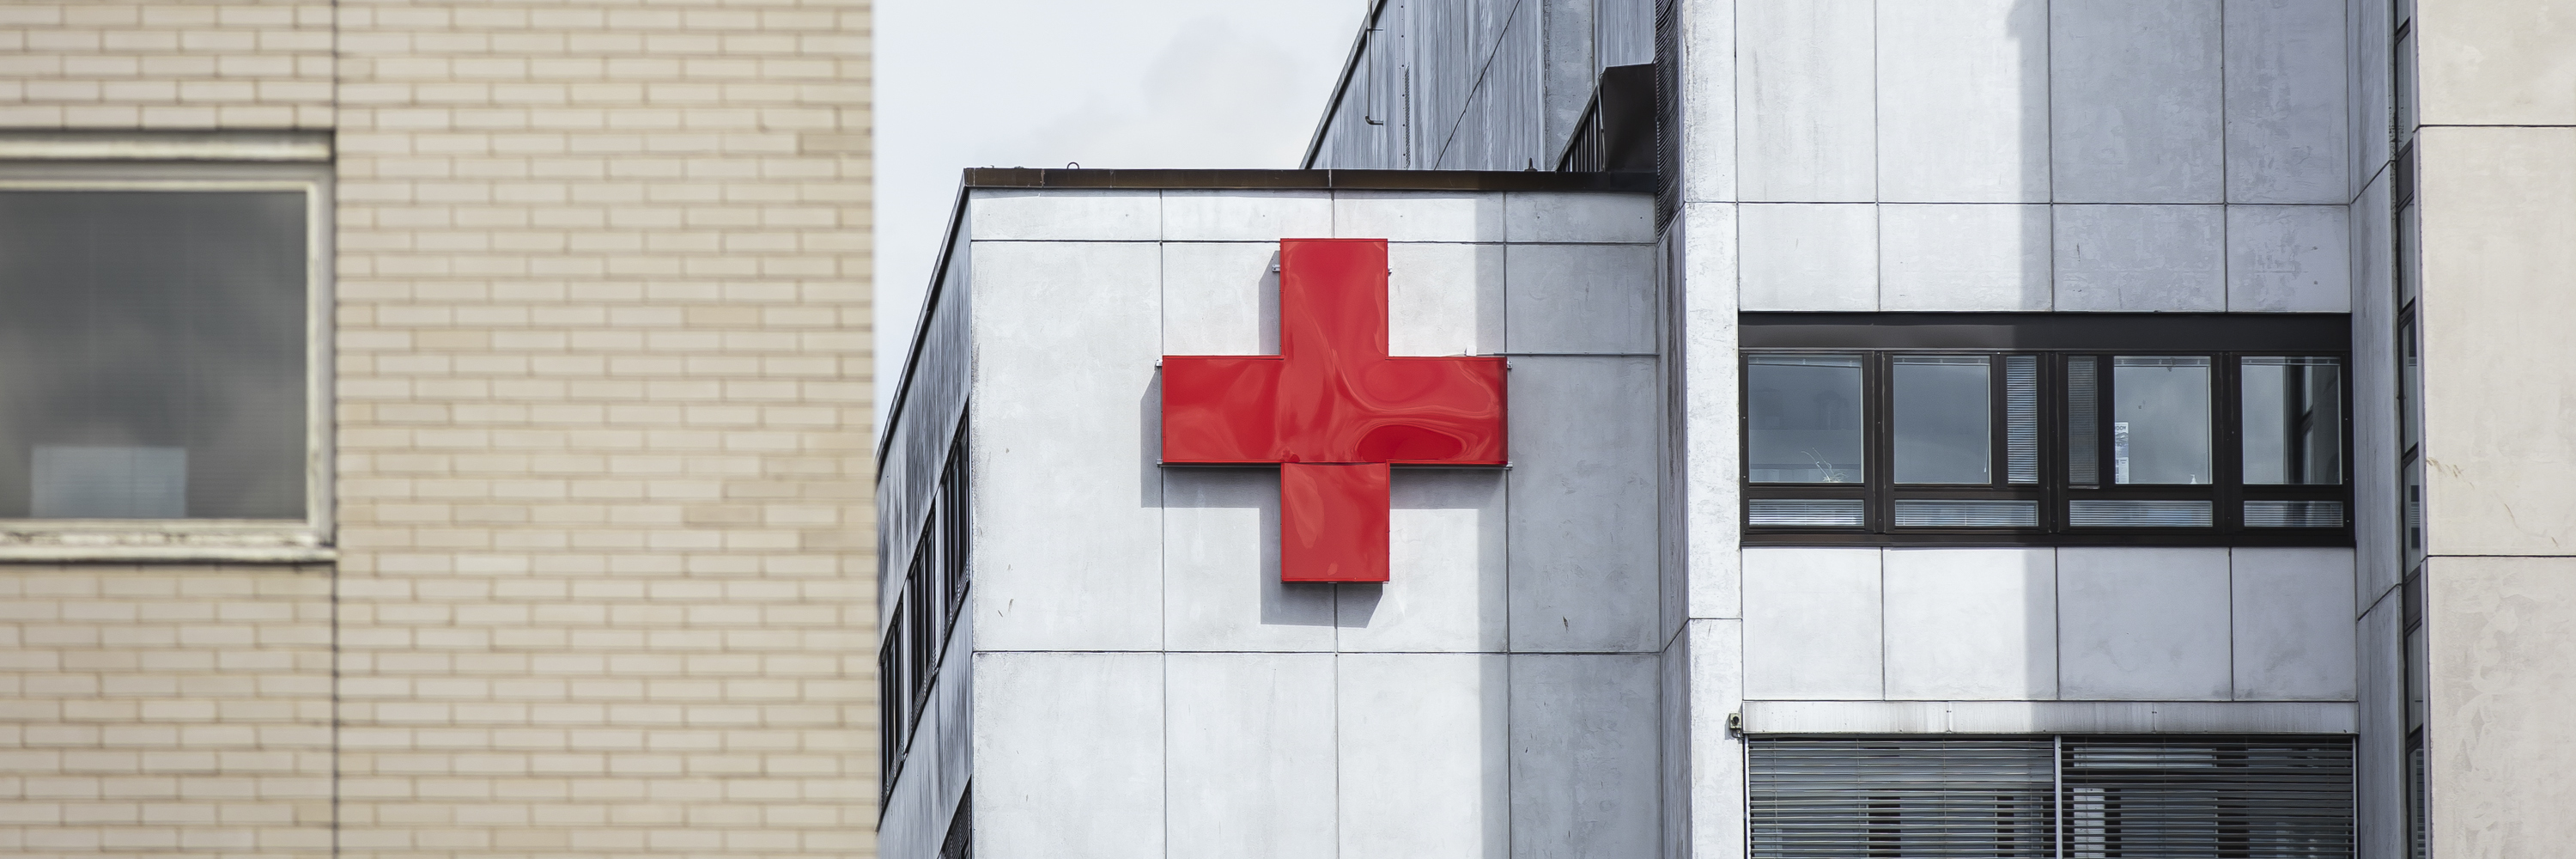 A hospital building with the Red Cross on its wall.